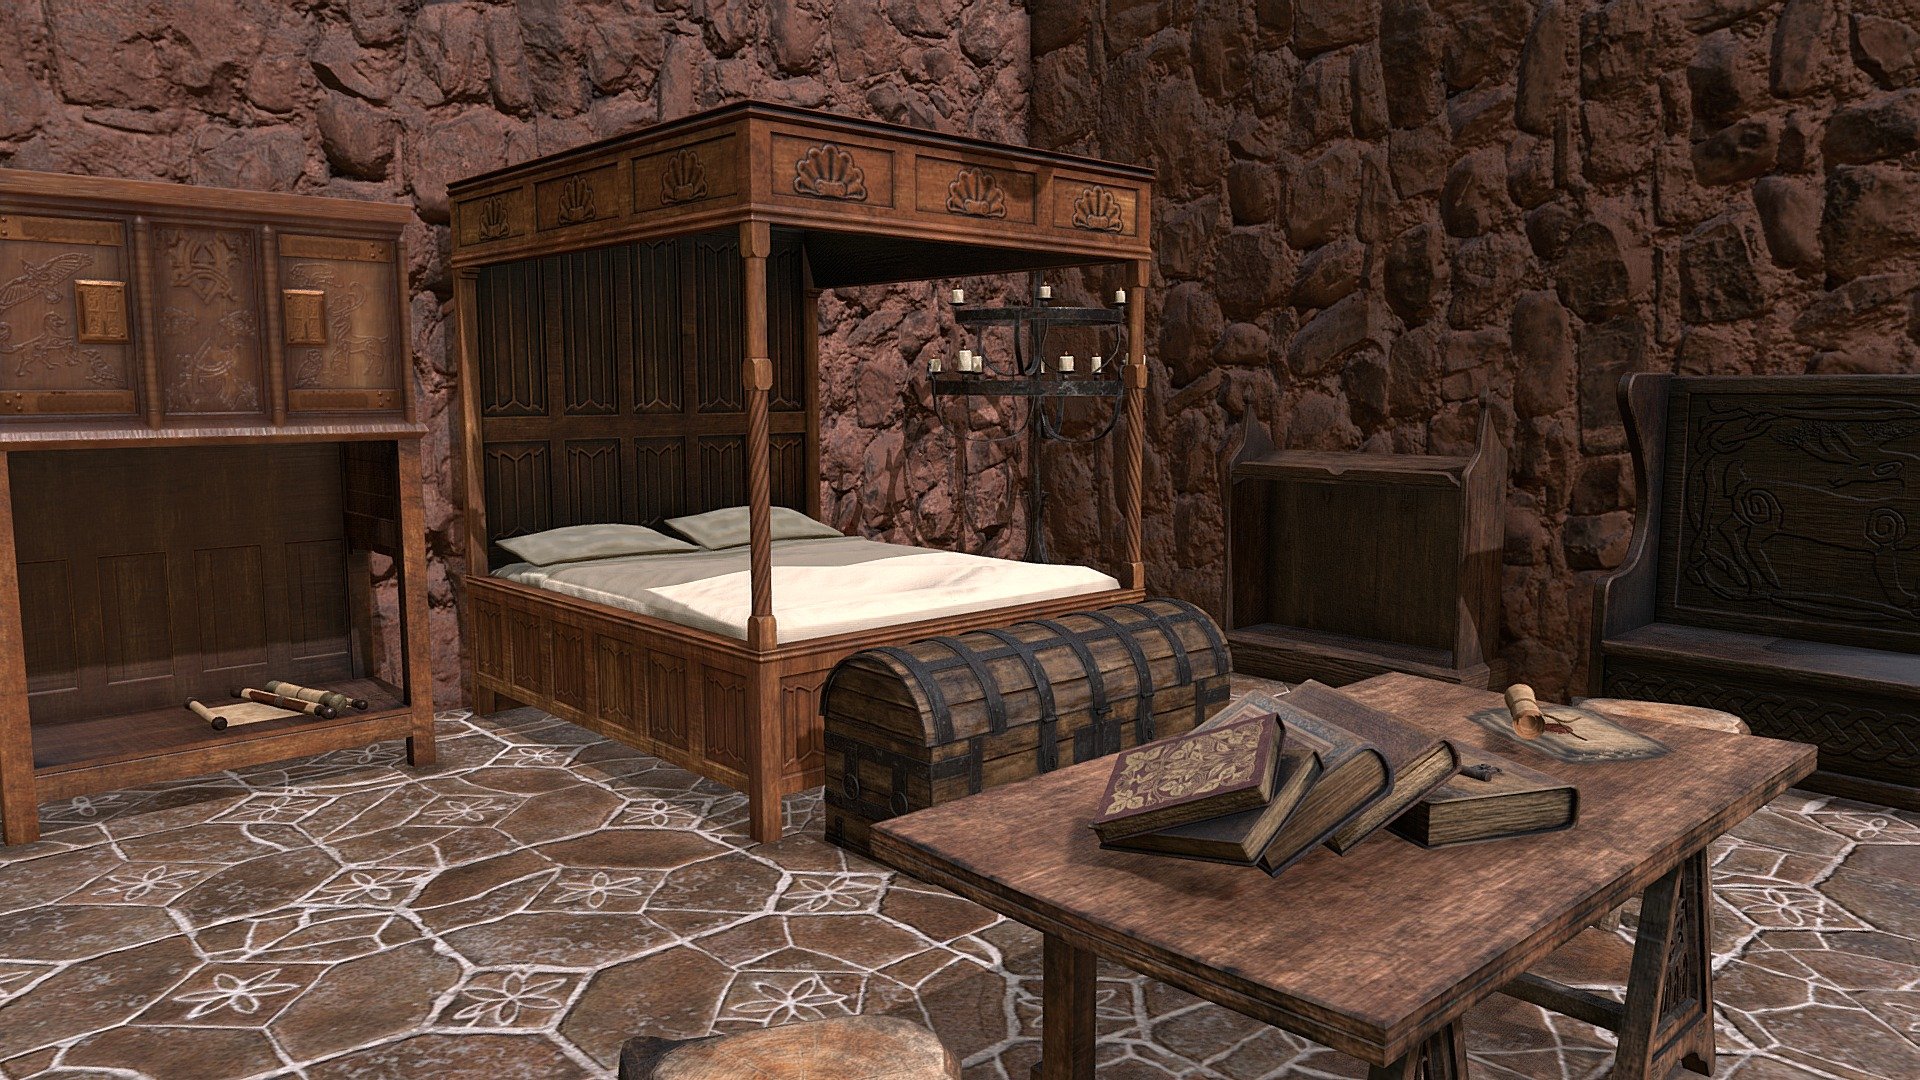 Medieval Elegant Bedroom Funishings - 14 3D Models PBR Texture available in 4096 x 4096 Maps include : Basecolor, Normal, Roughness, Height and Metallic. Customer Service Guaranteed 3d model